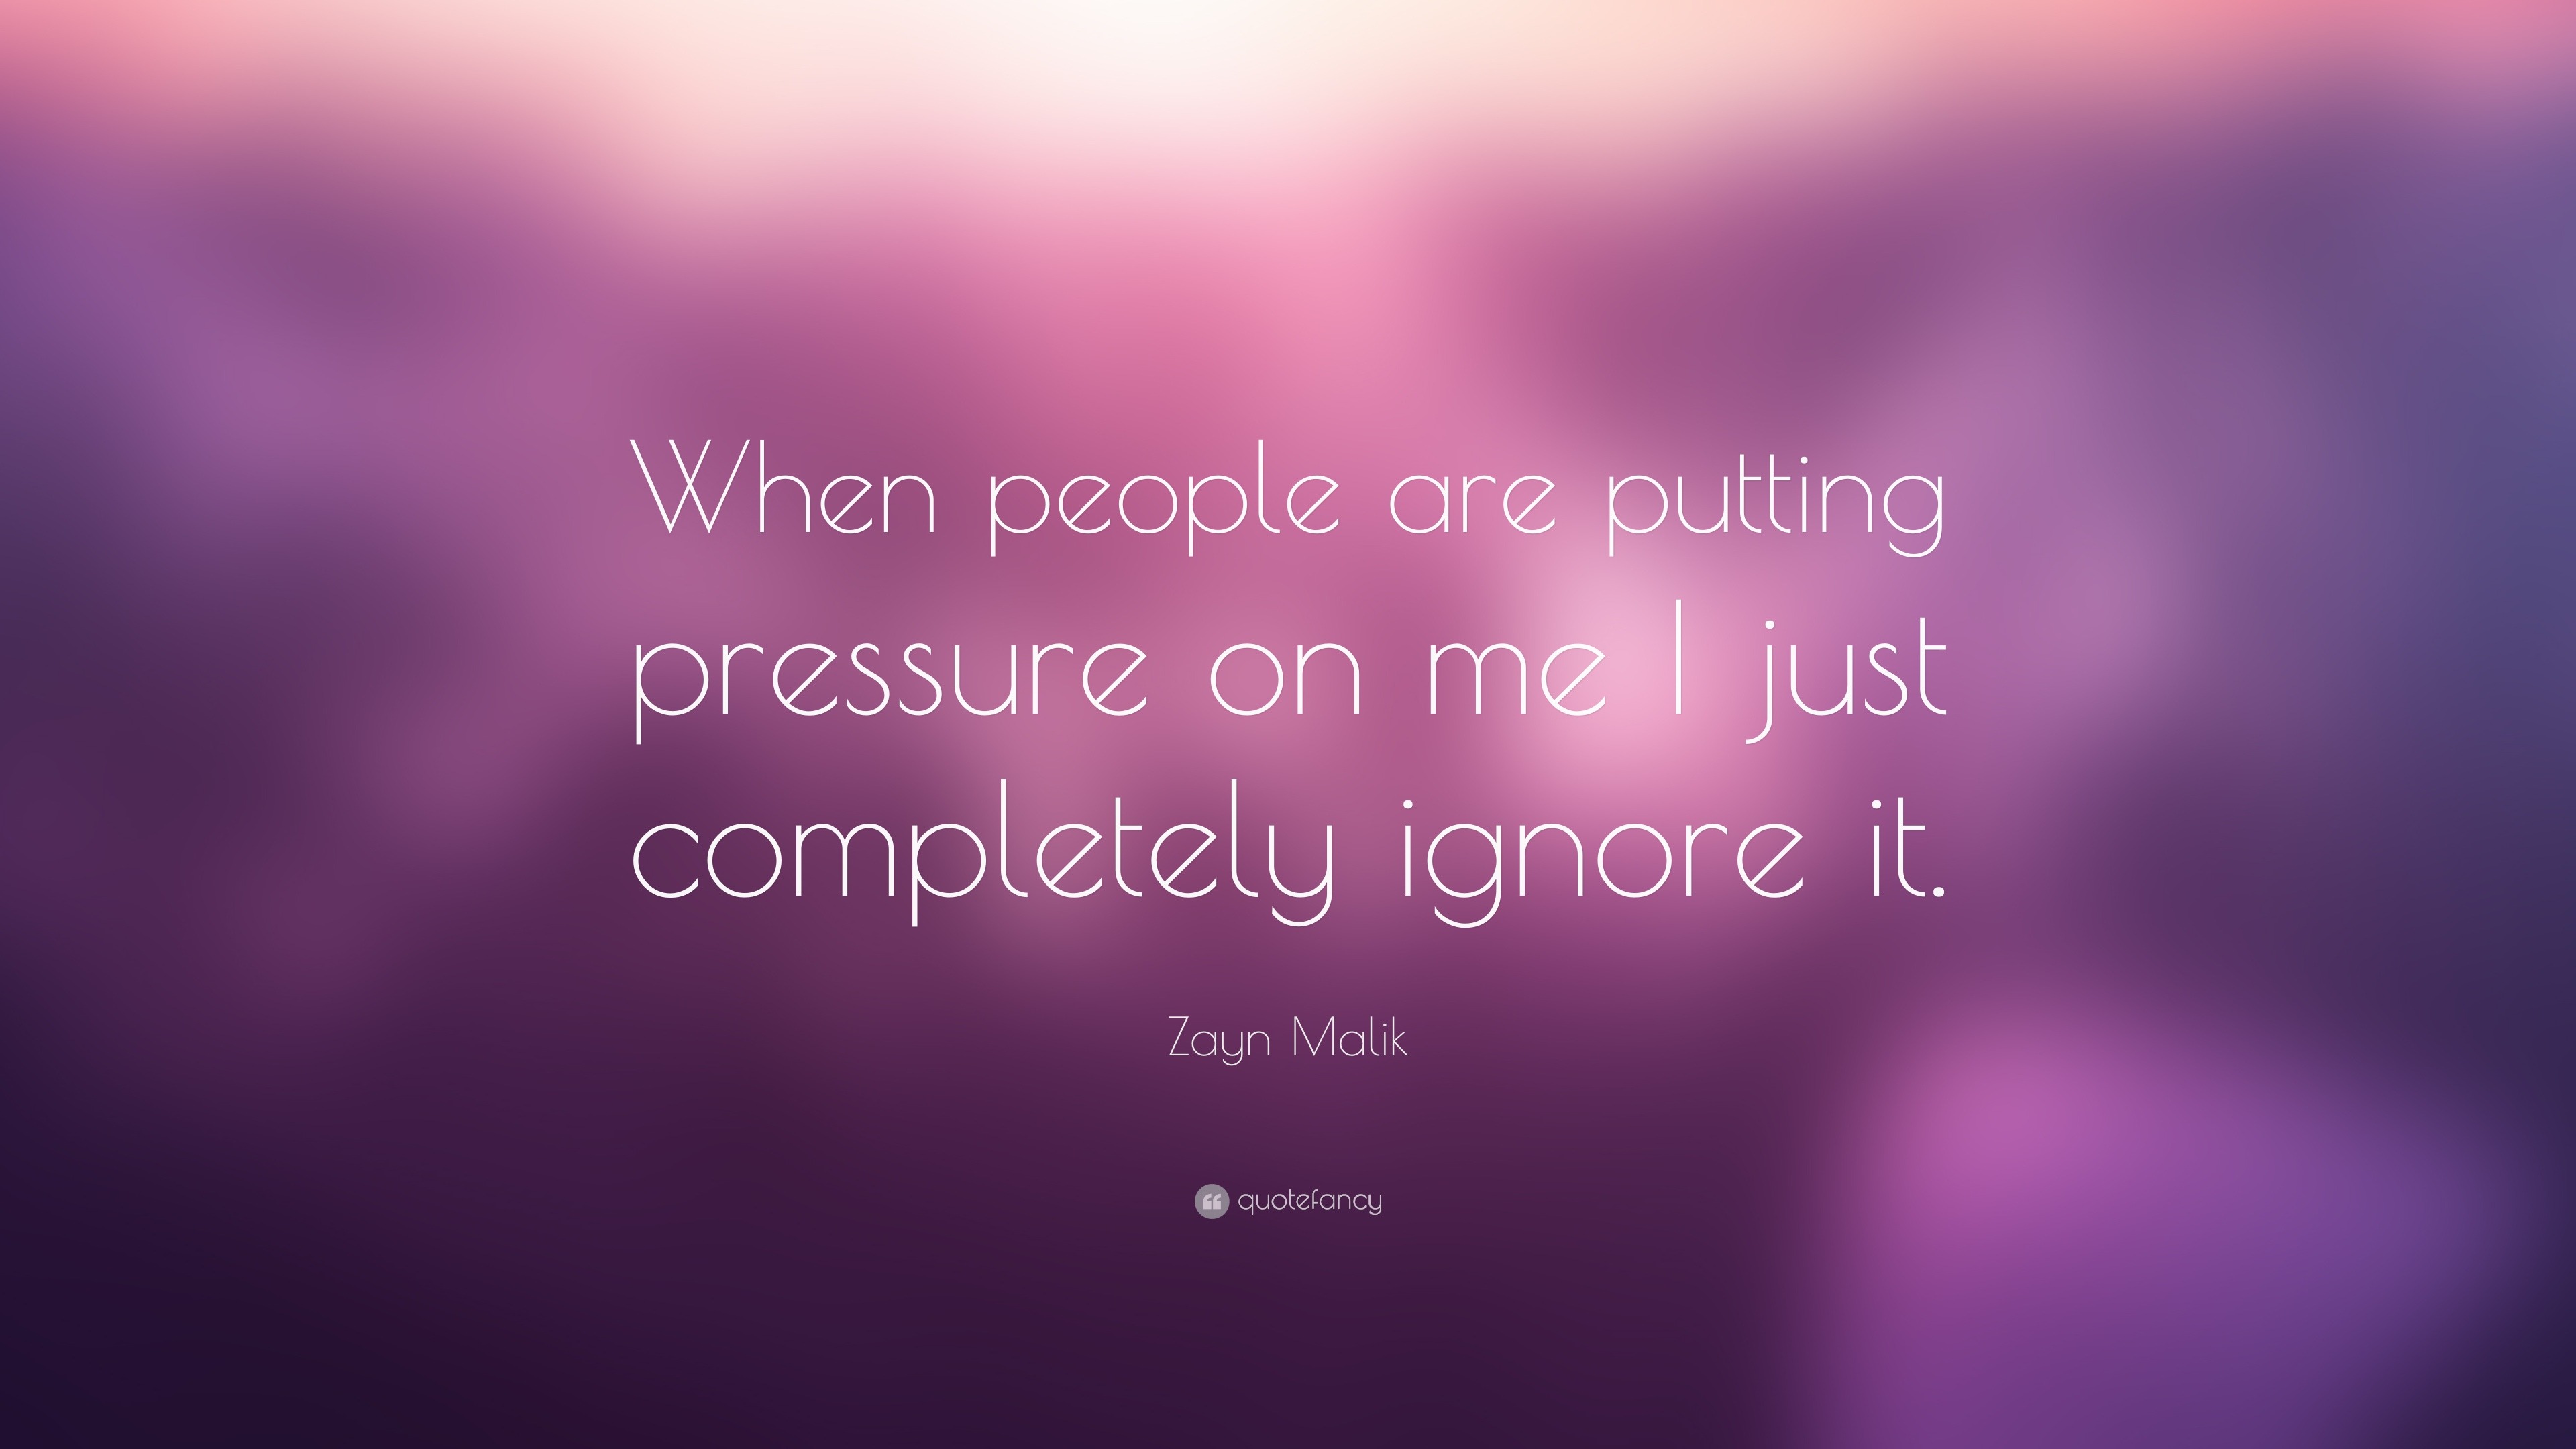 https://quotefancy.com/media/wallpaper/3840x2160/1939821-Zayn-Malik-Quote-When-people-are-putting-pressure-on-me-I-just.jpg